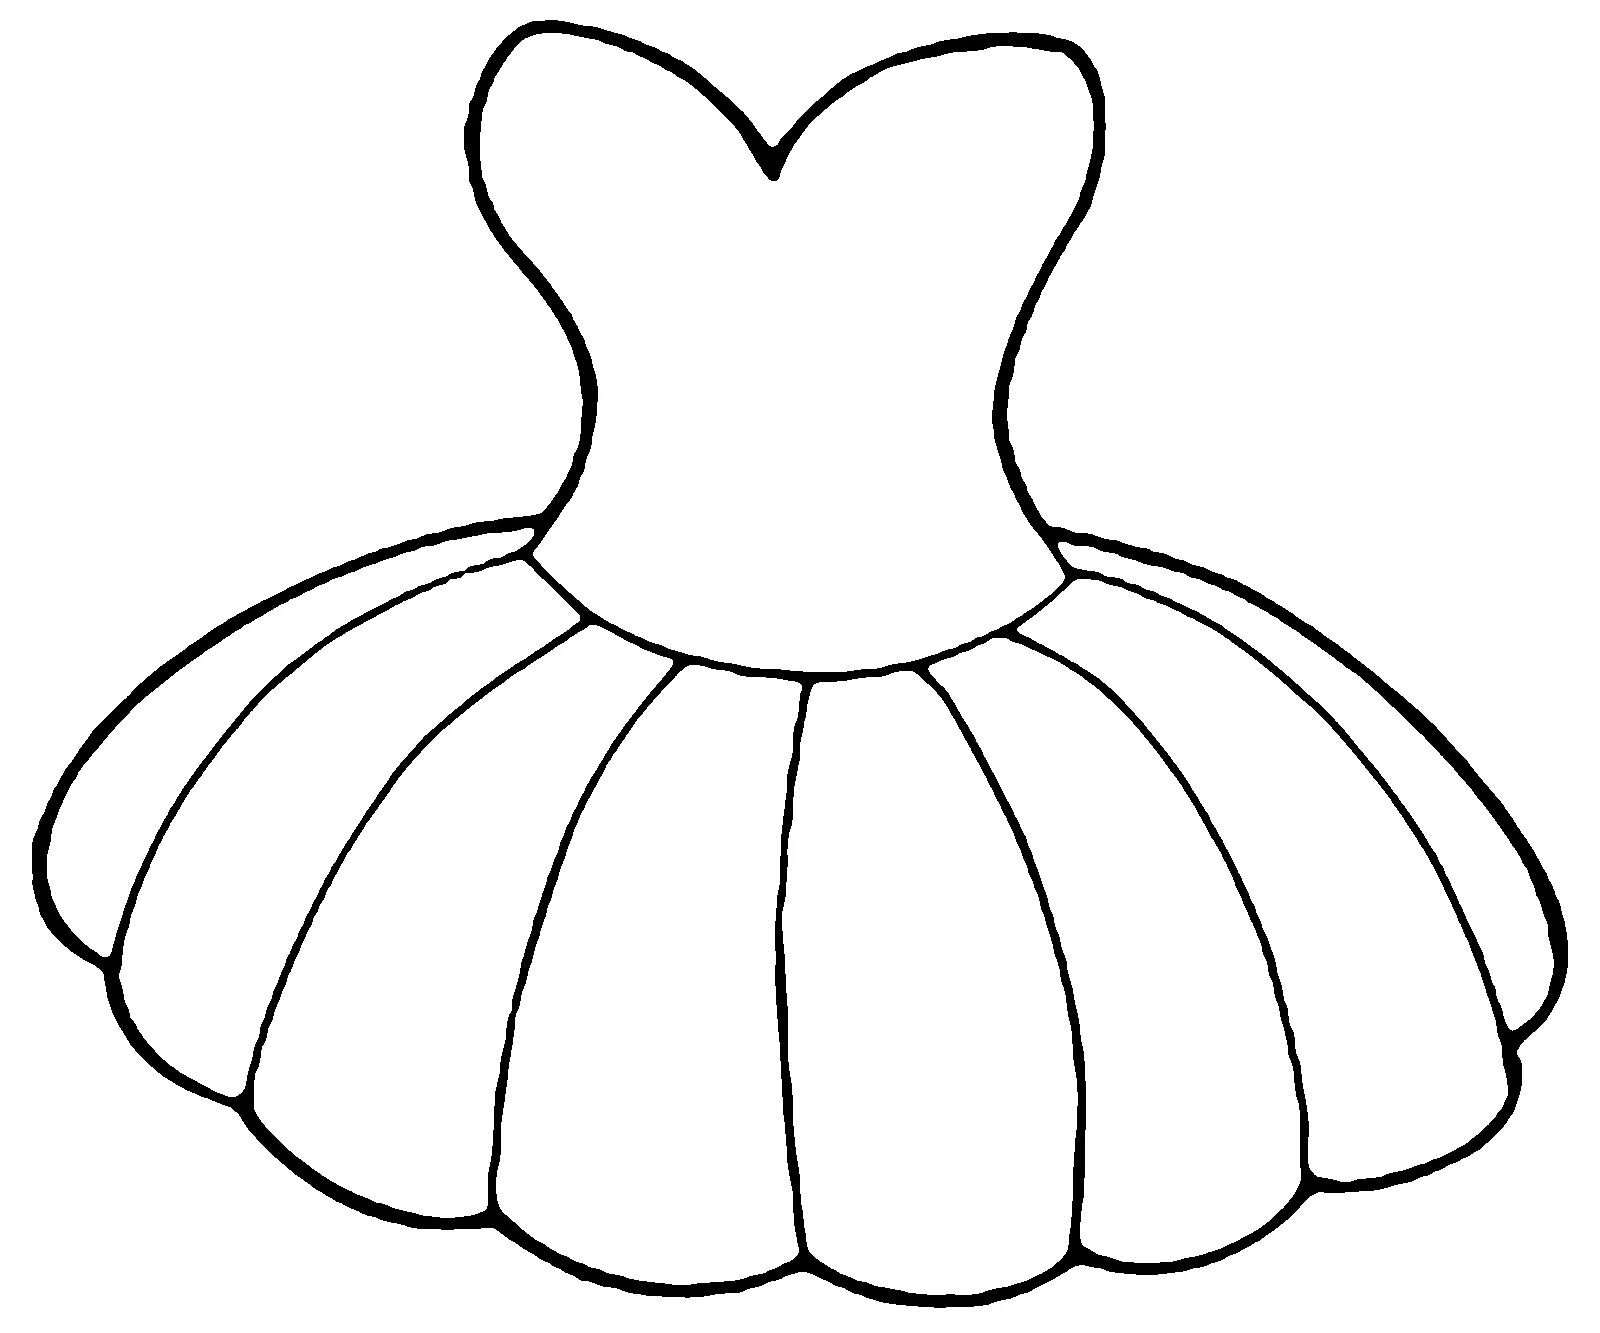 Coloring page stunning doll dress for children 4-5 years old